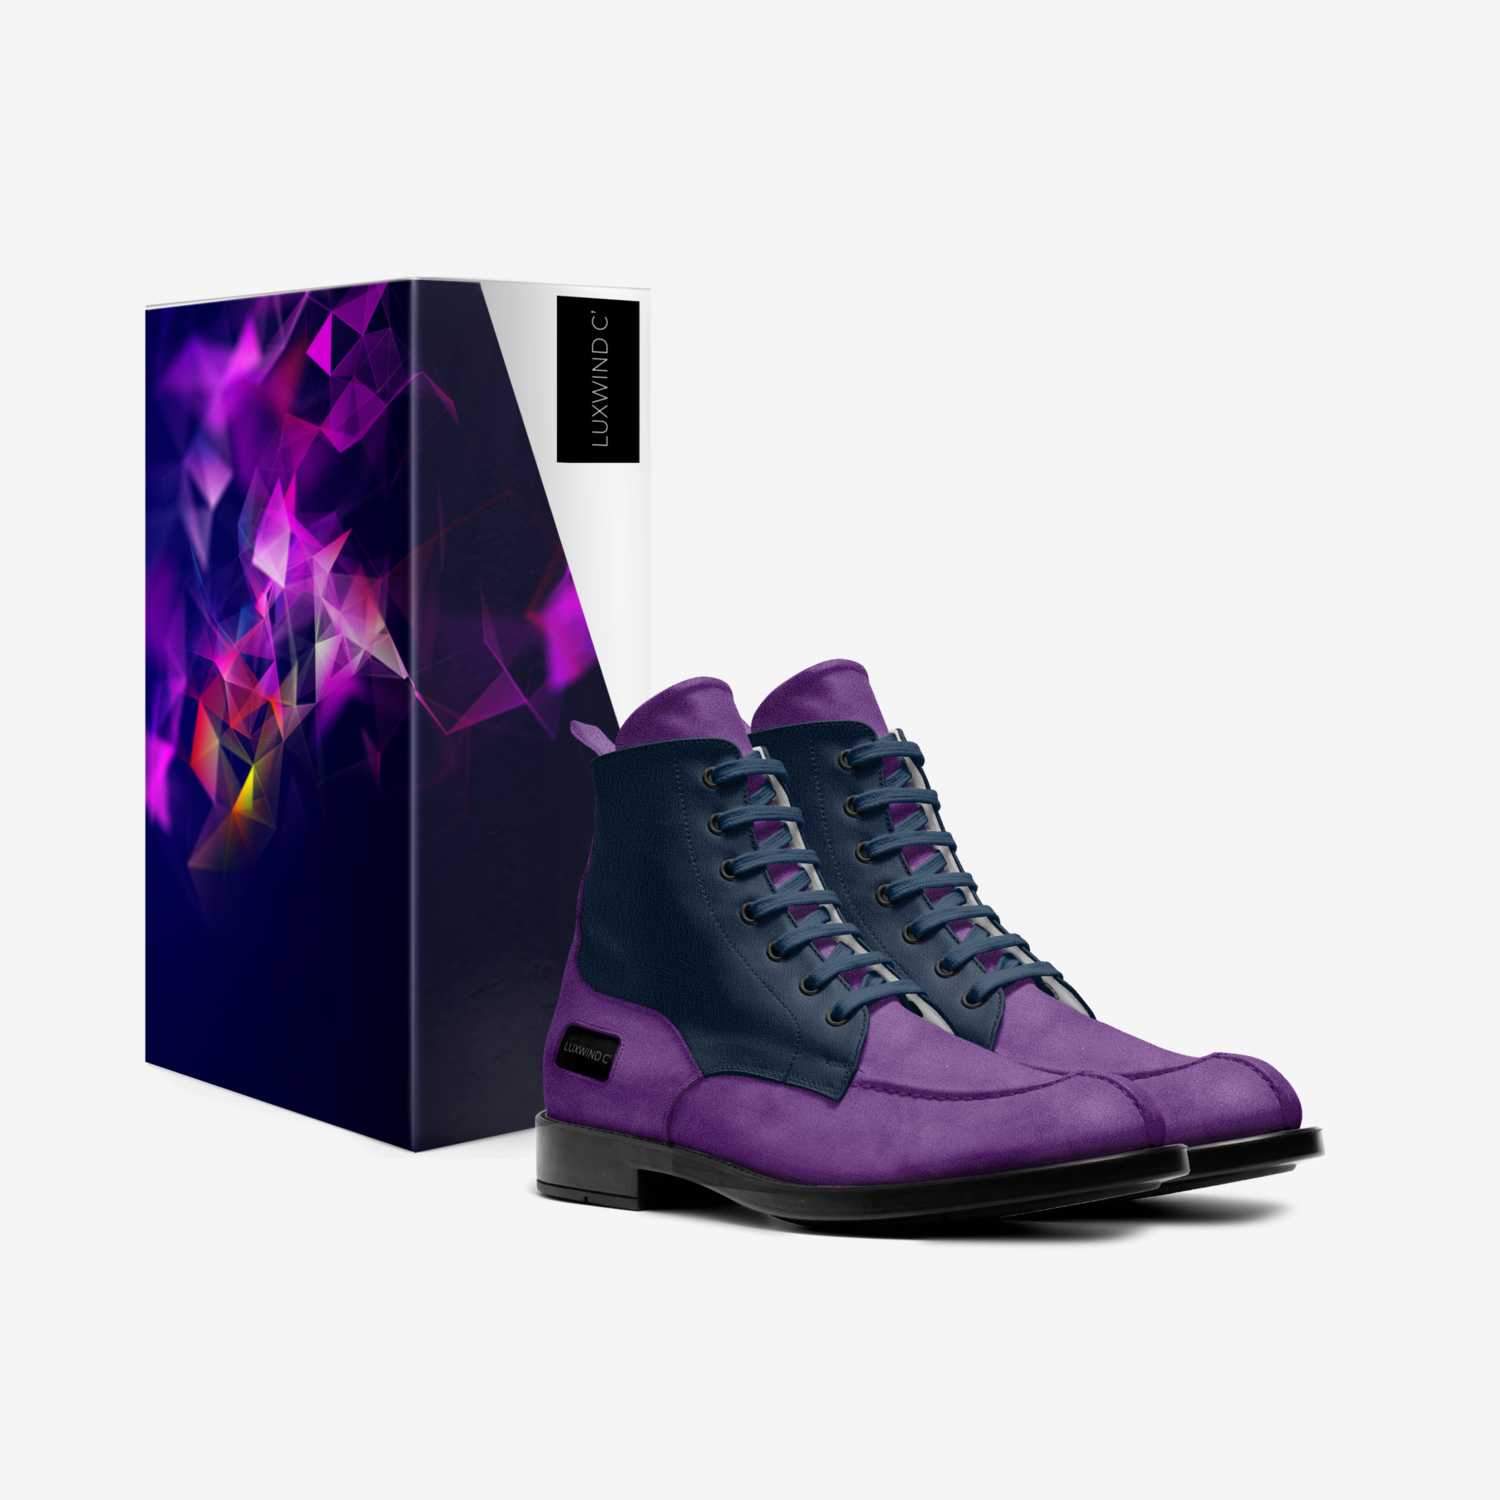 Luxwind C custom made in Italy shoes by Ethan Bonser | Box view